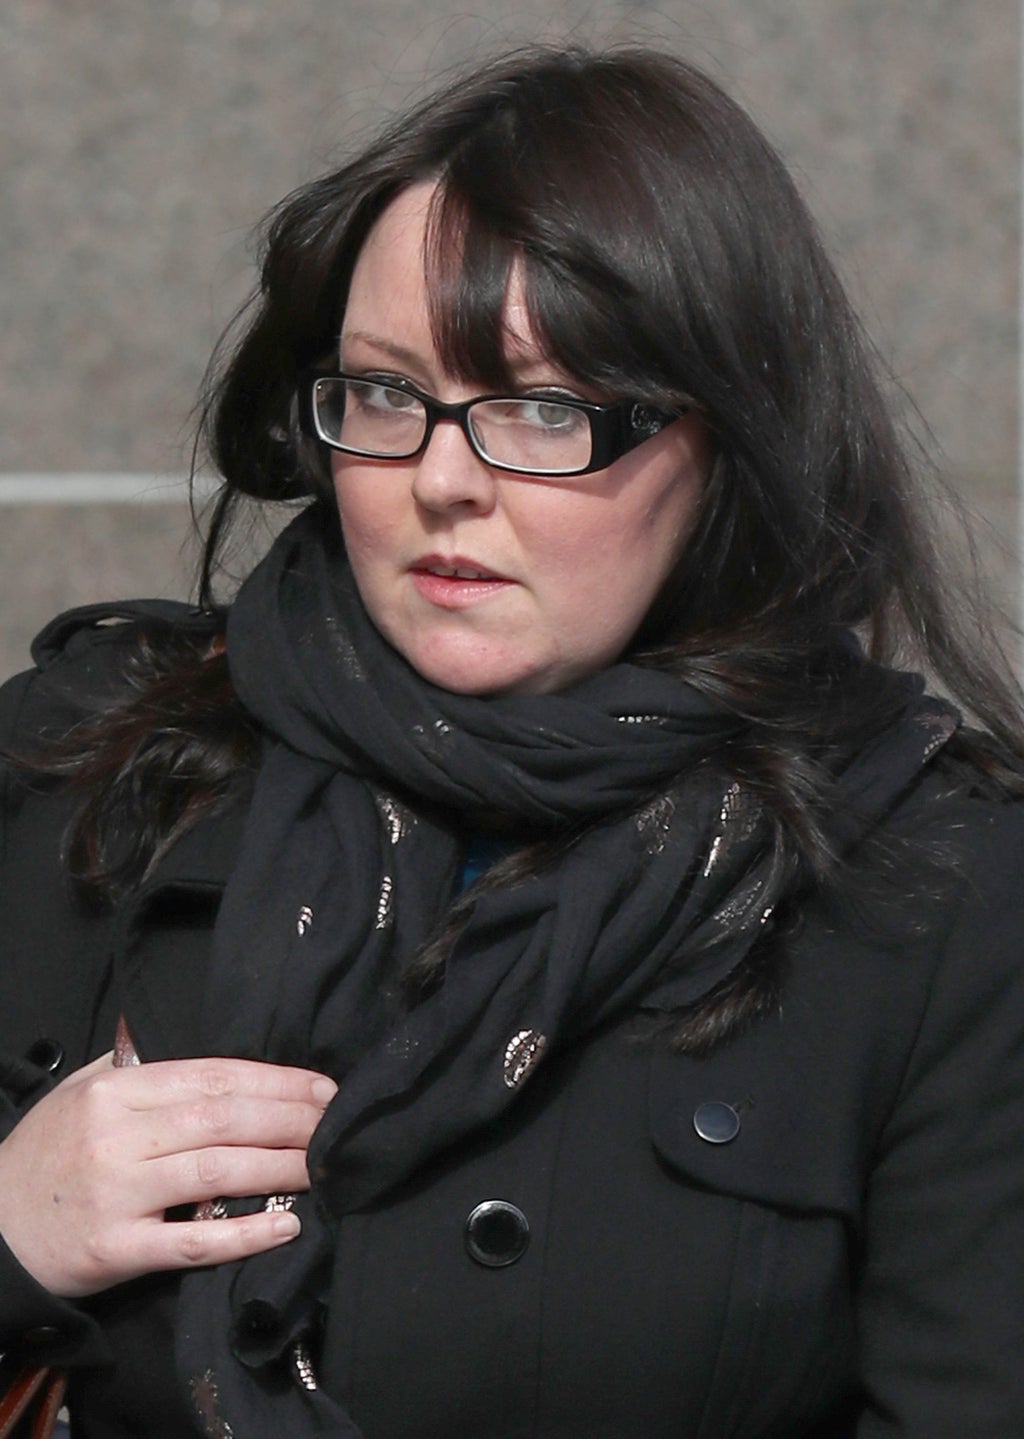 Former SNP MP Natalie McGarry guilty of embezzling more than £24,000